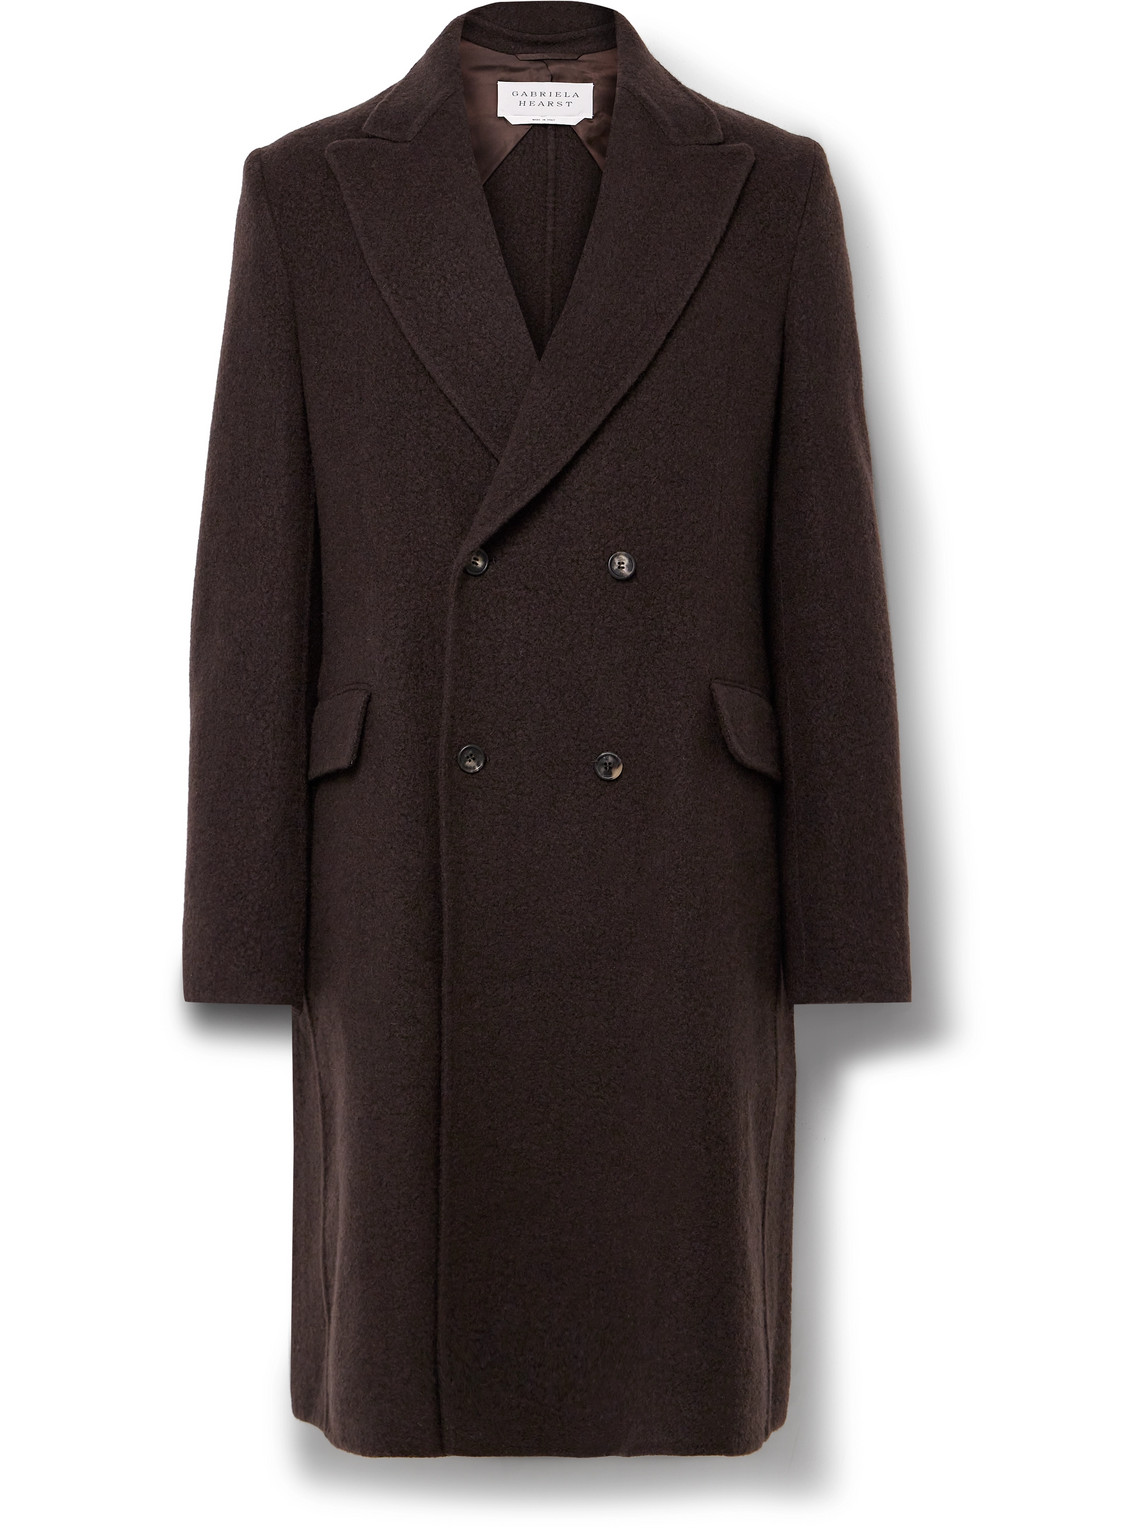 GABRIELA HEARST MCAFFREY DOUBLE-BREASTED RECYCLED-CASHMERE OVERCOAT